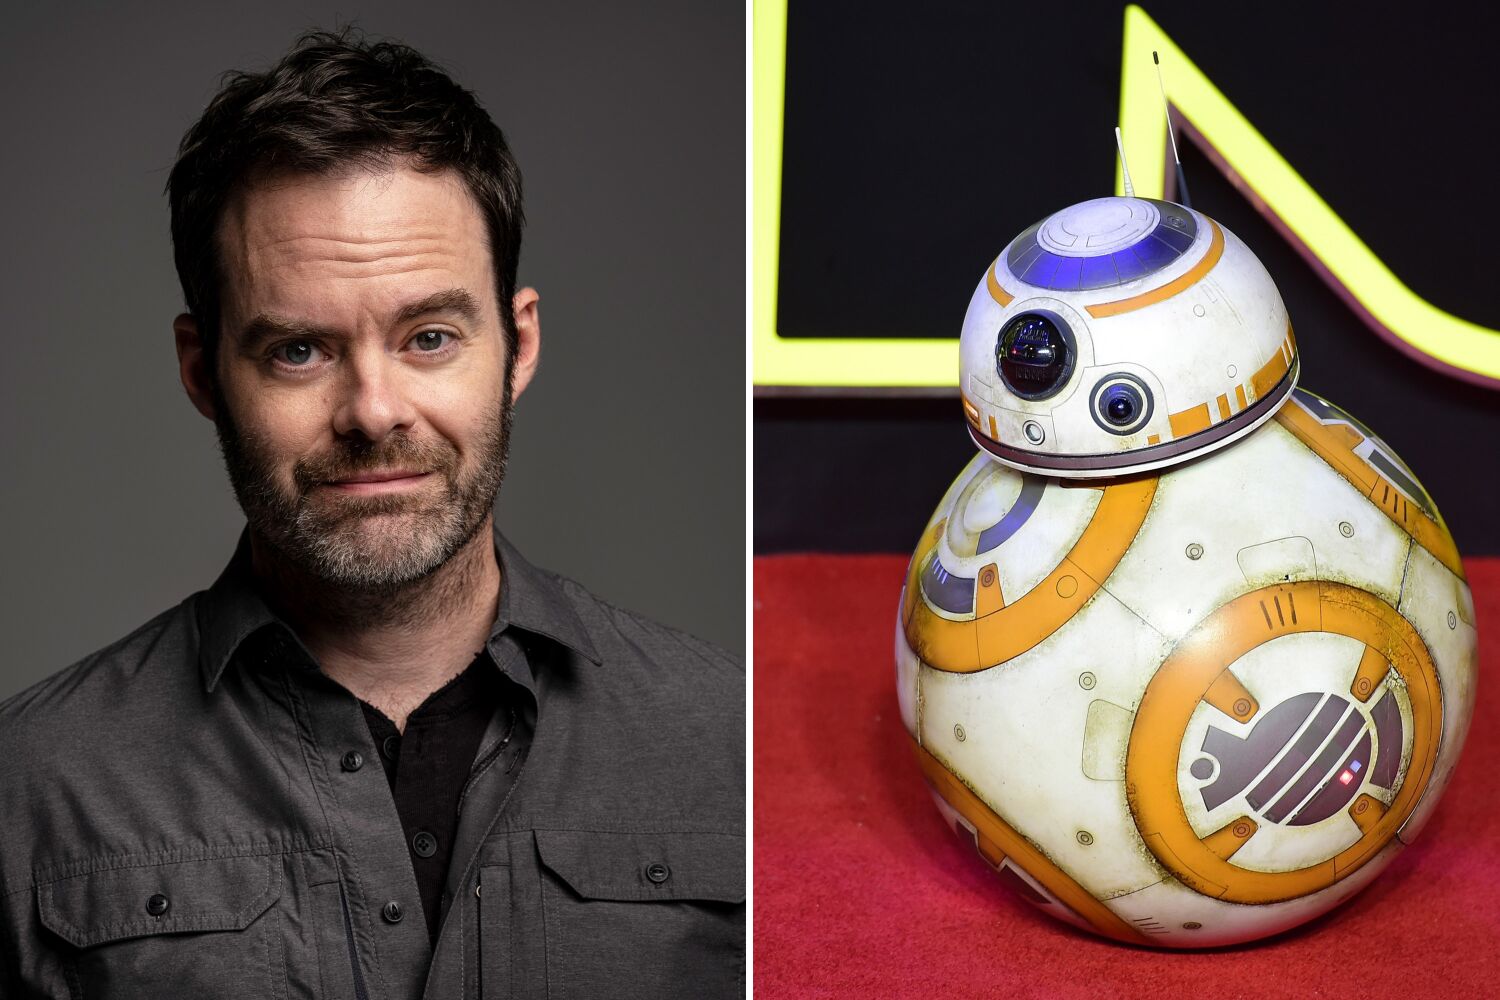 Bill Hader won't sign 'Star Wars' merch and it's BB-8's (and a dishonest fan's) fault